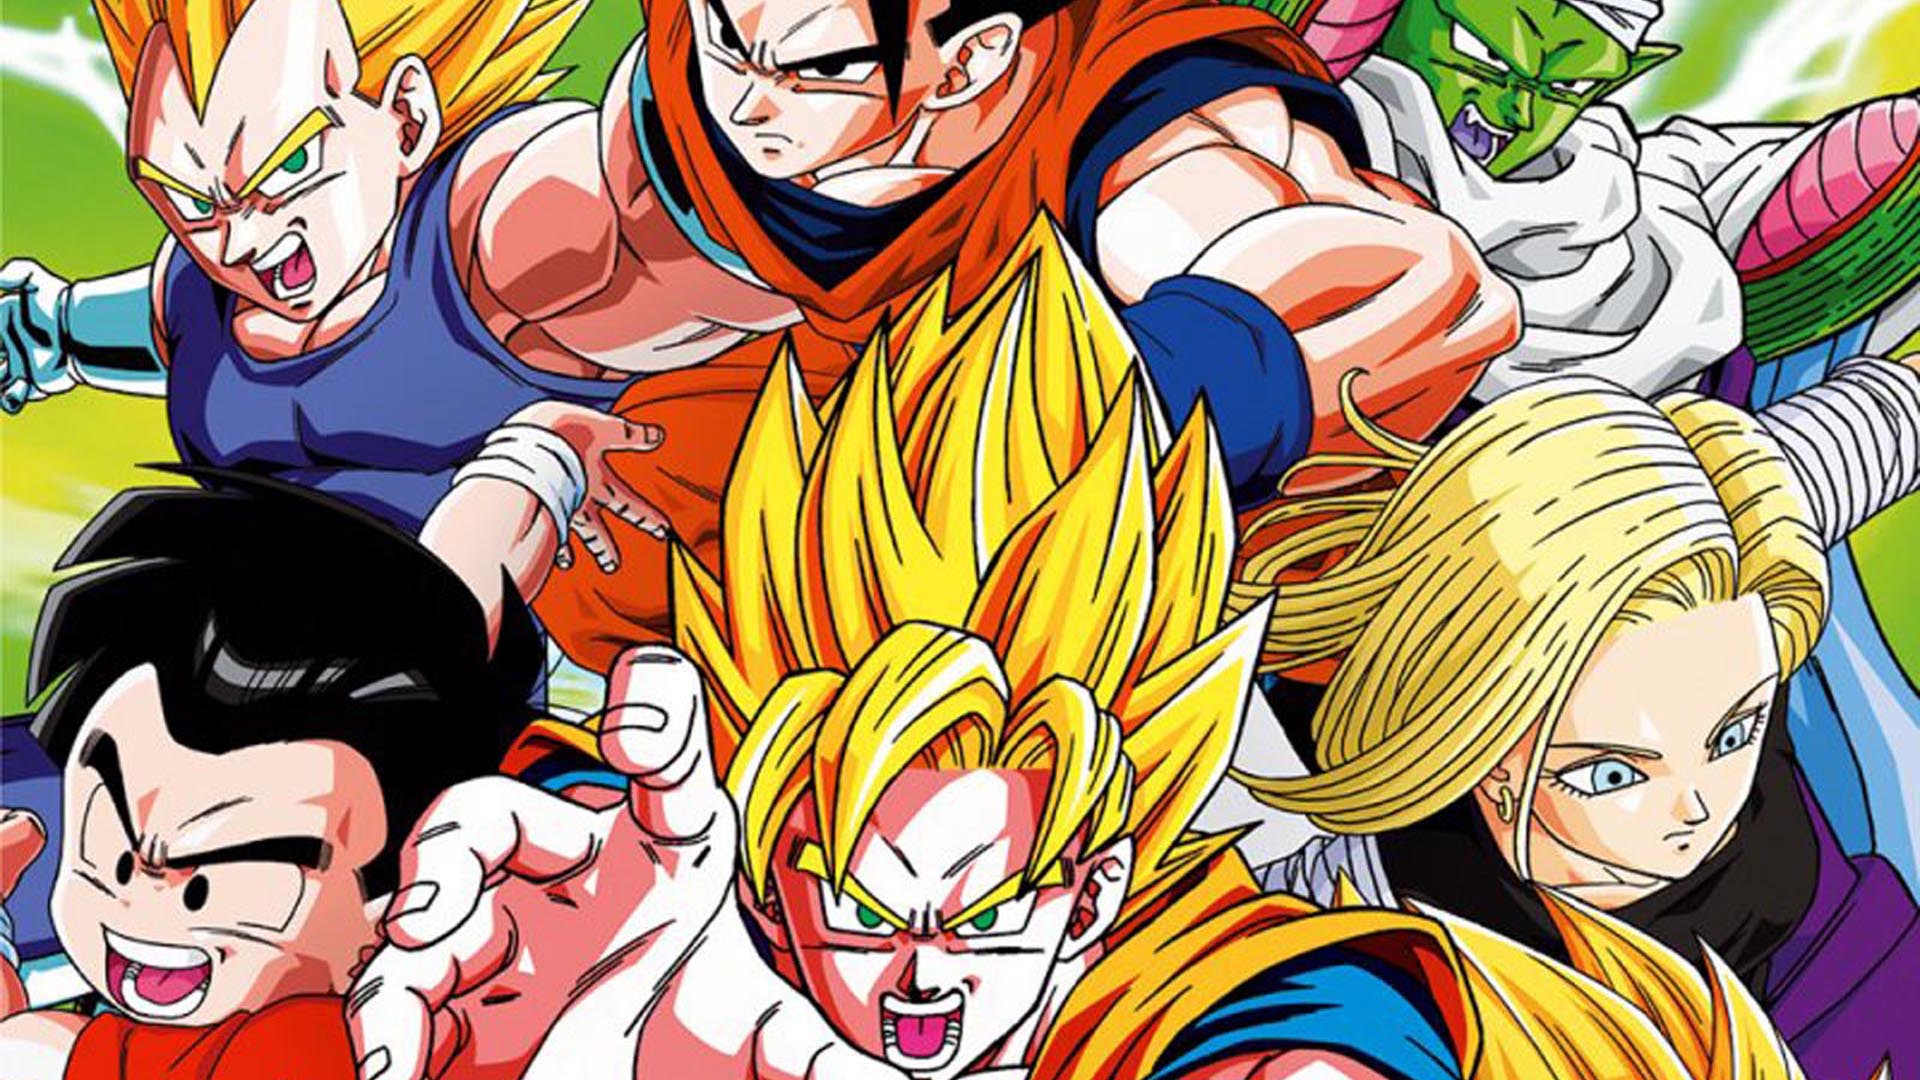 Dragonball HD 1920x1080 Wallpapers 1920x1080 Wallpapers Pictures